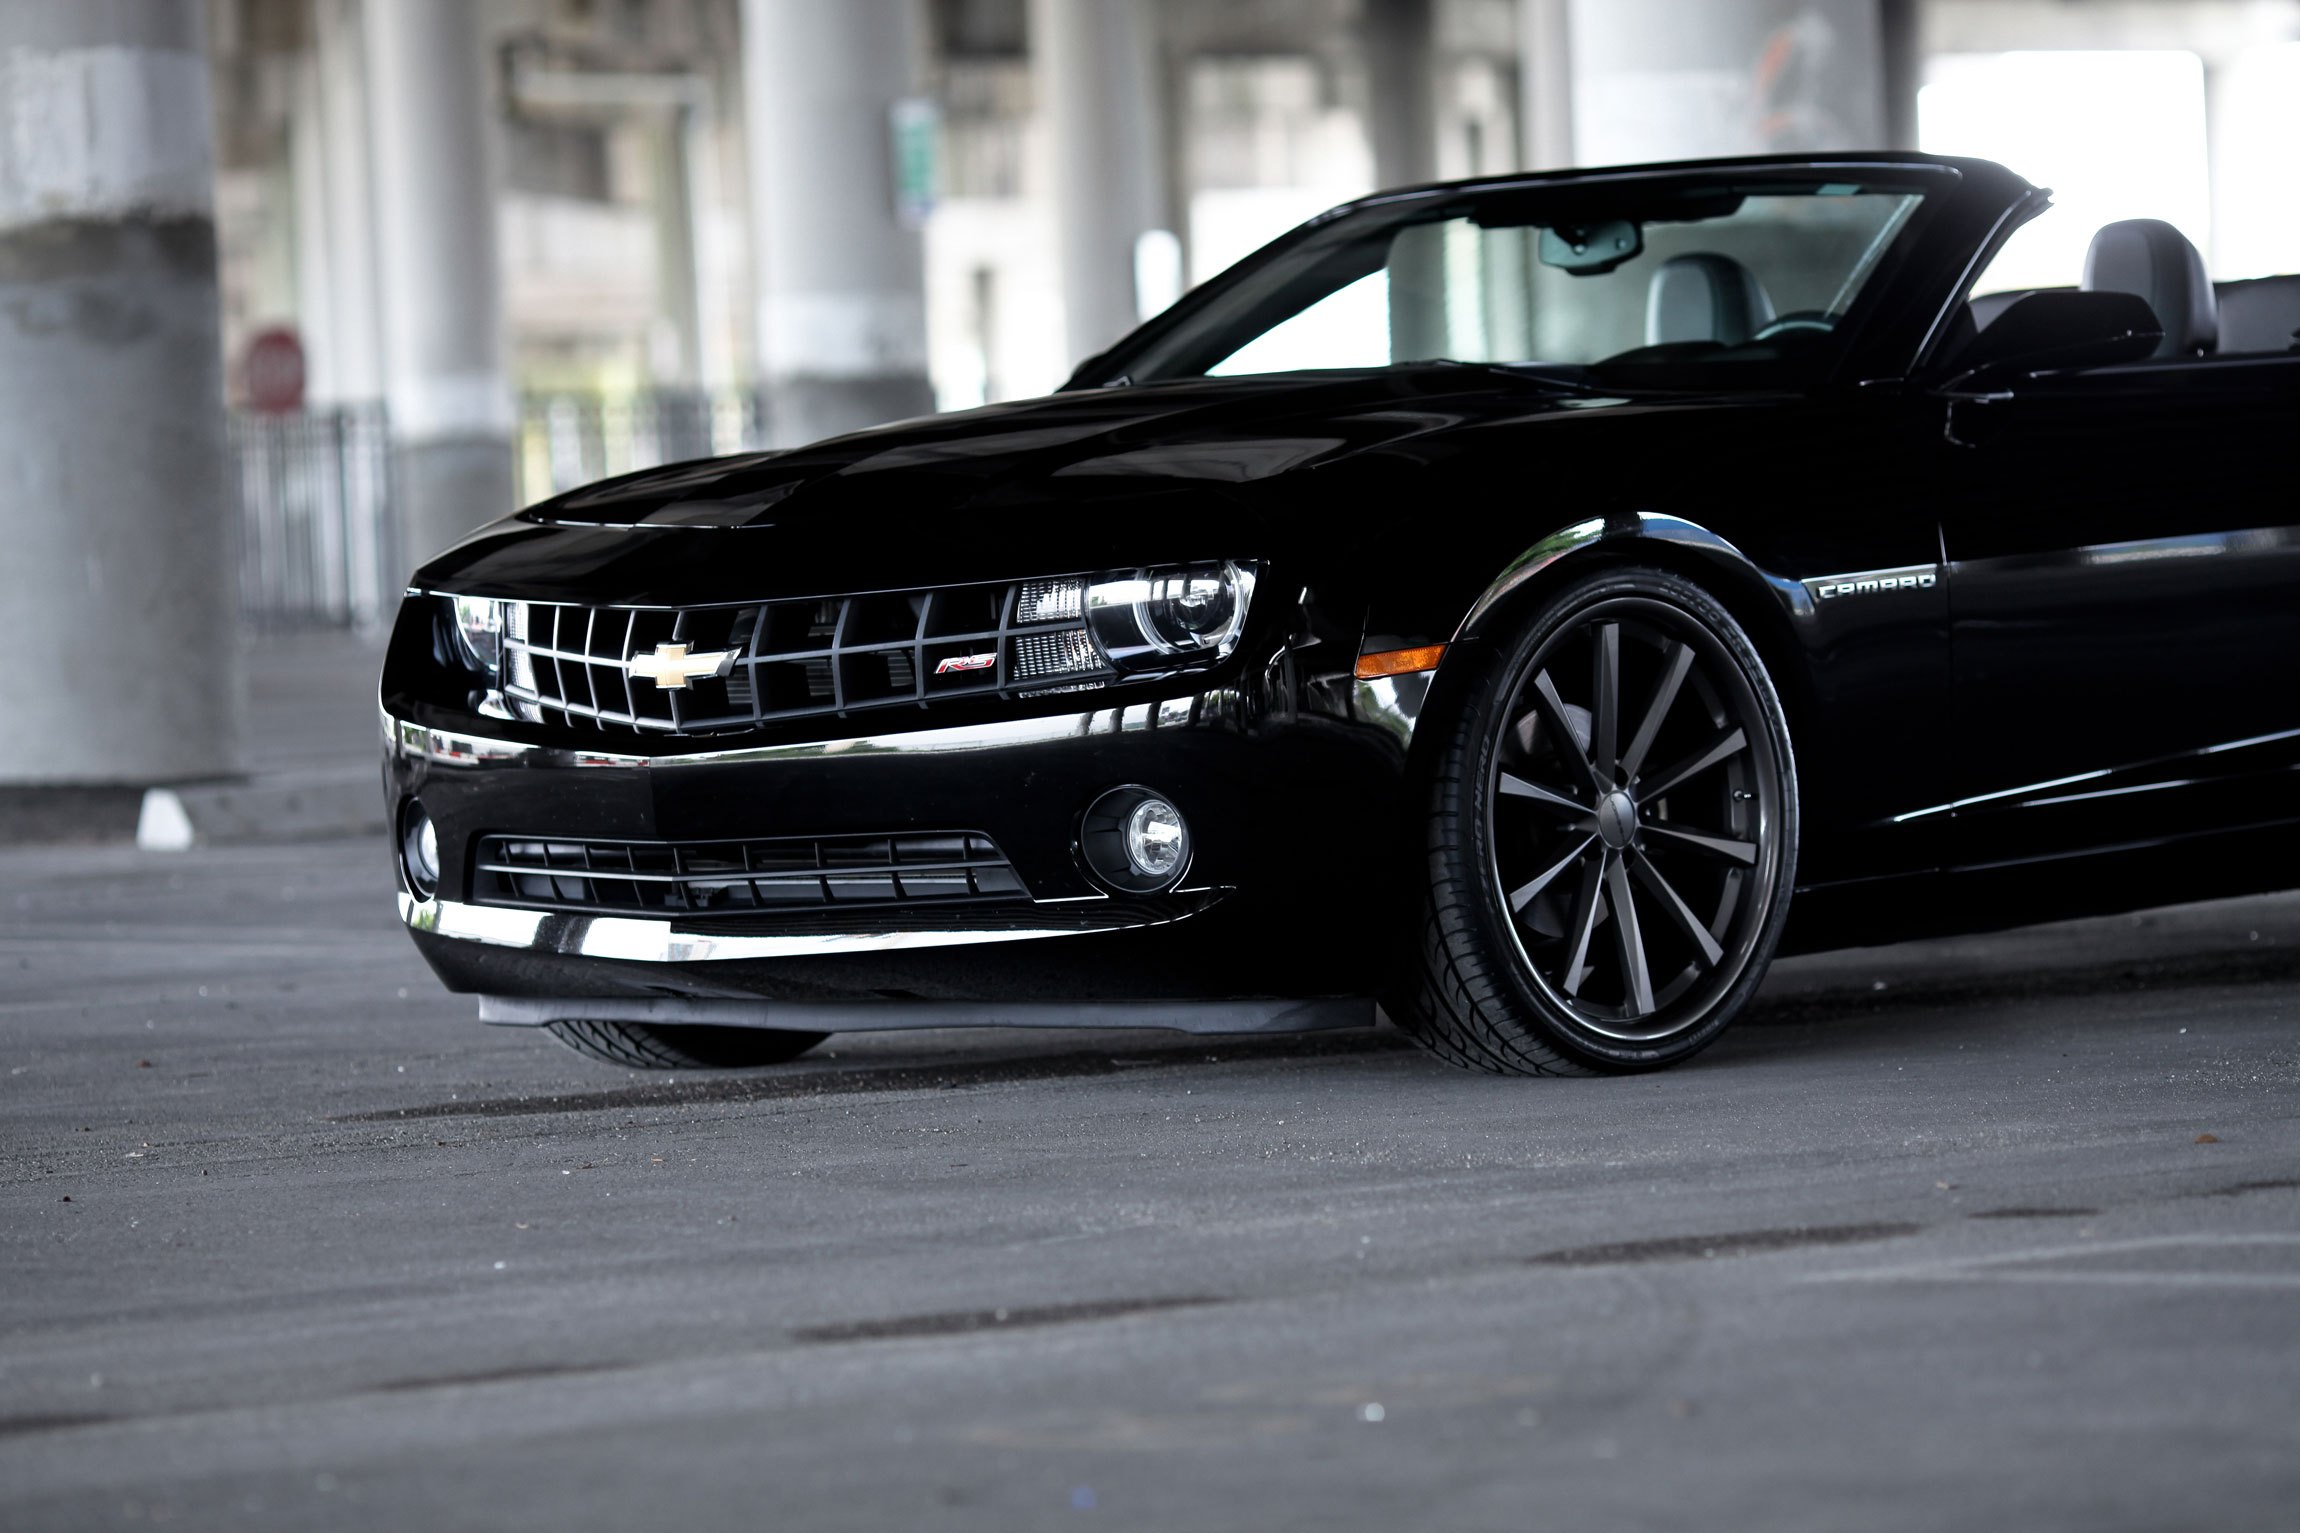 Aftermarket Front Bumper on Black Convertible Chevy Camaro - Photo by Vossen